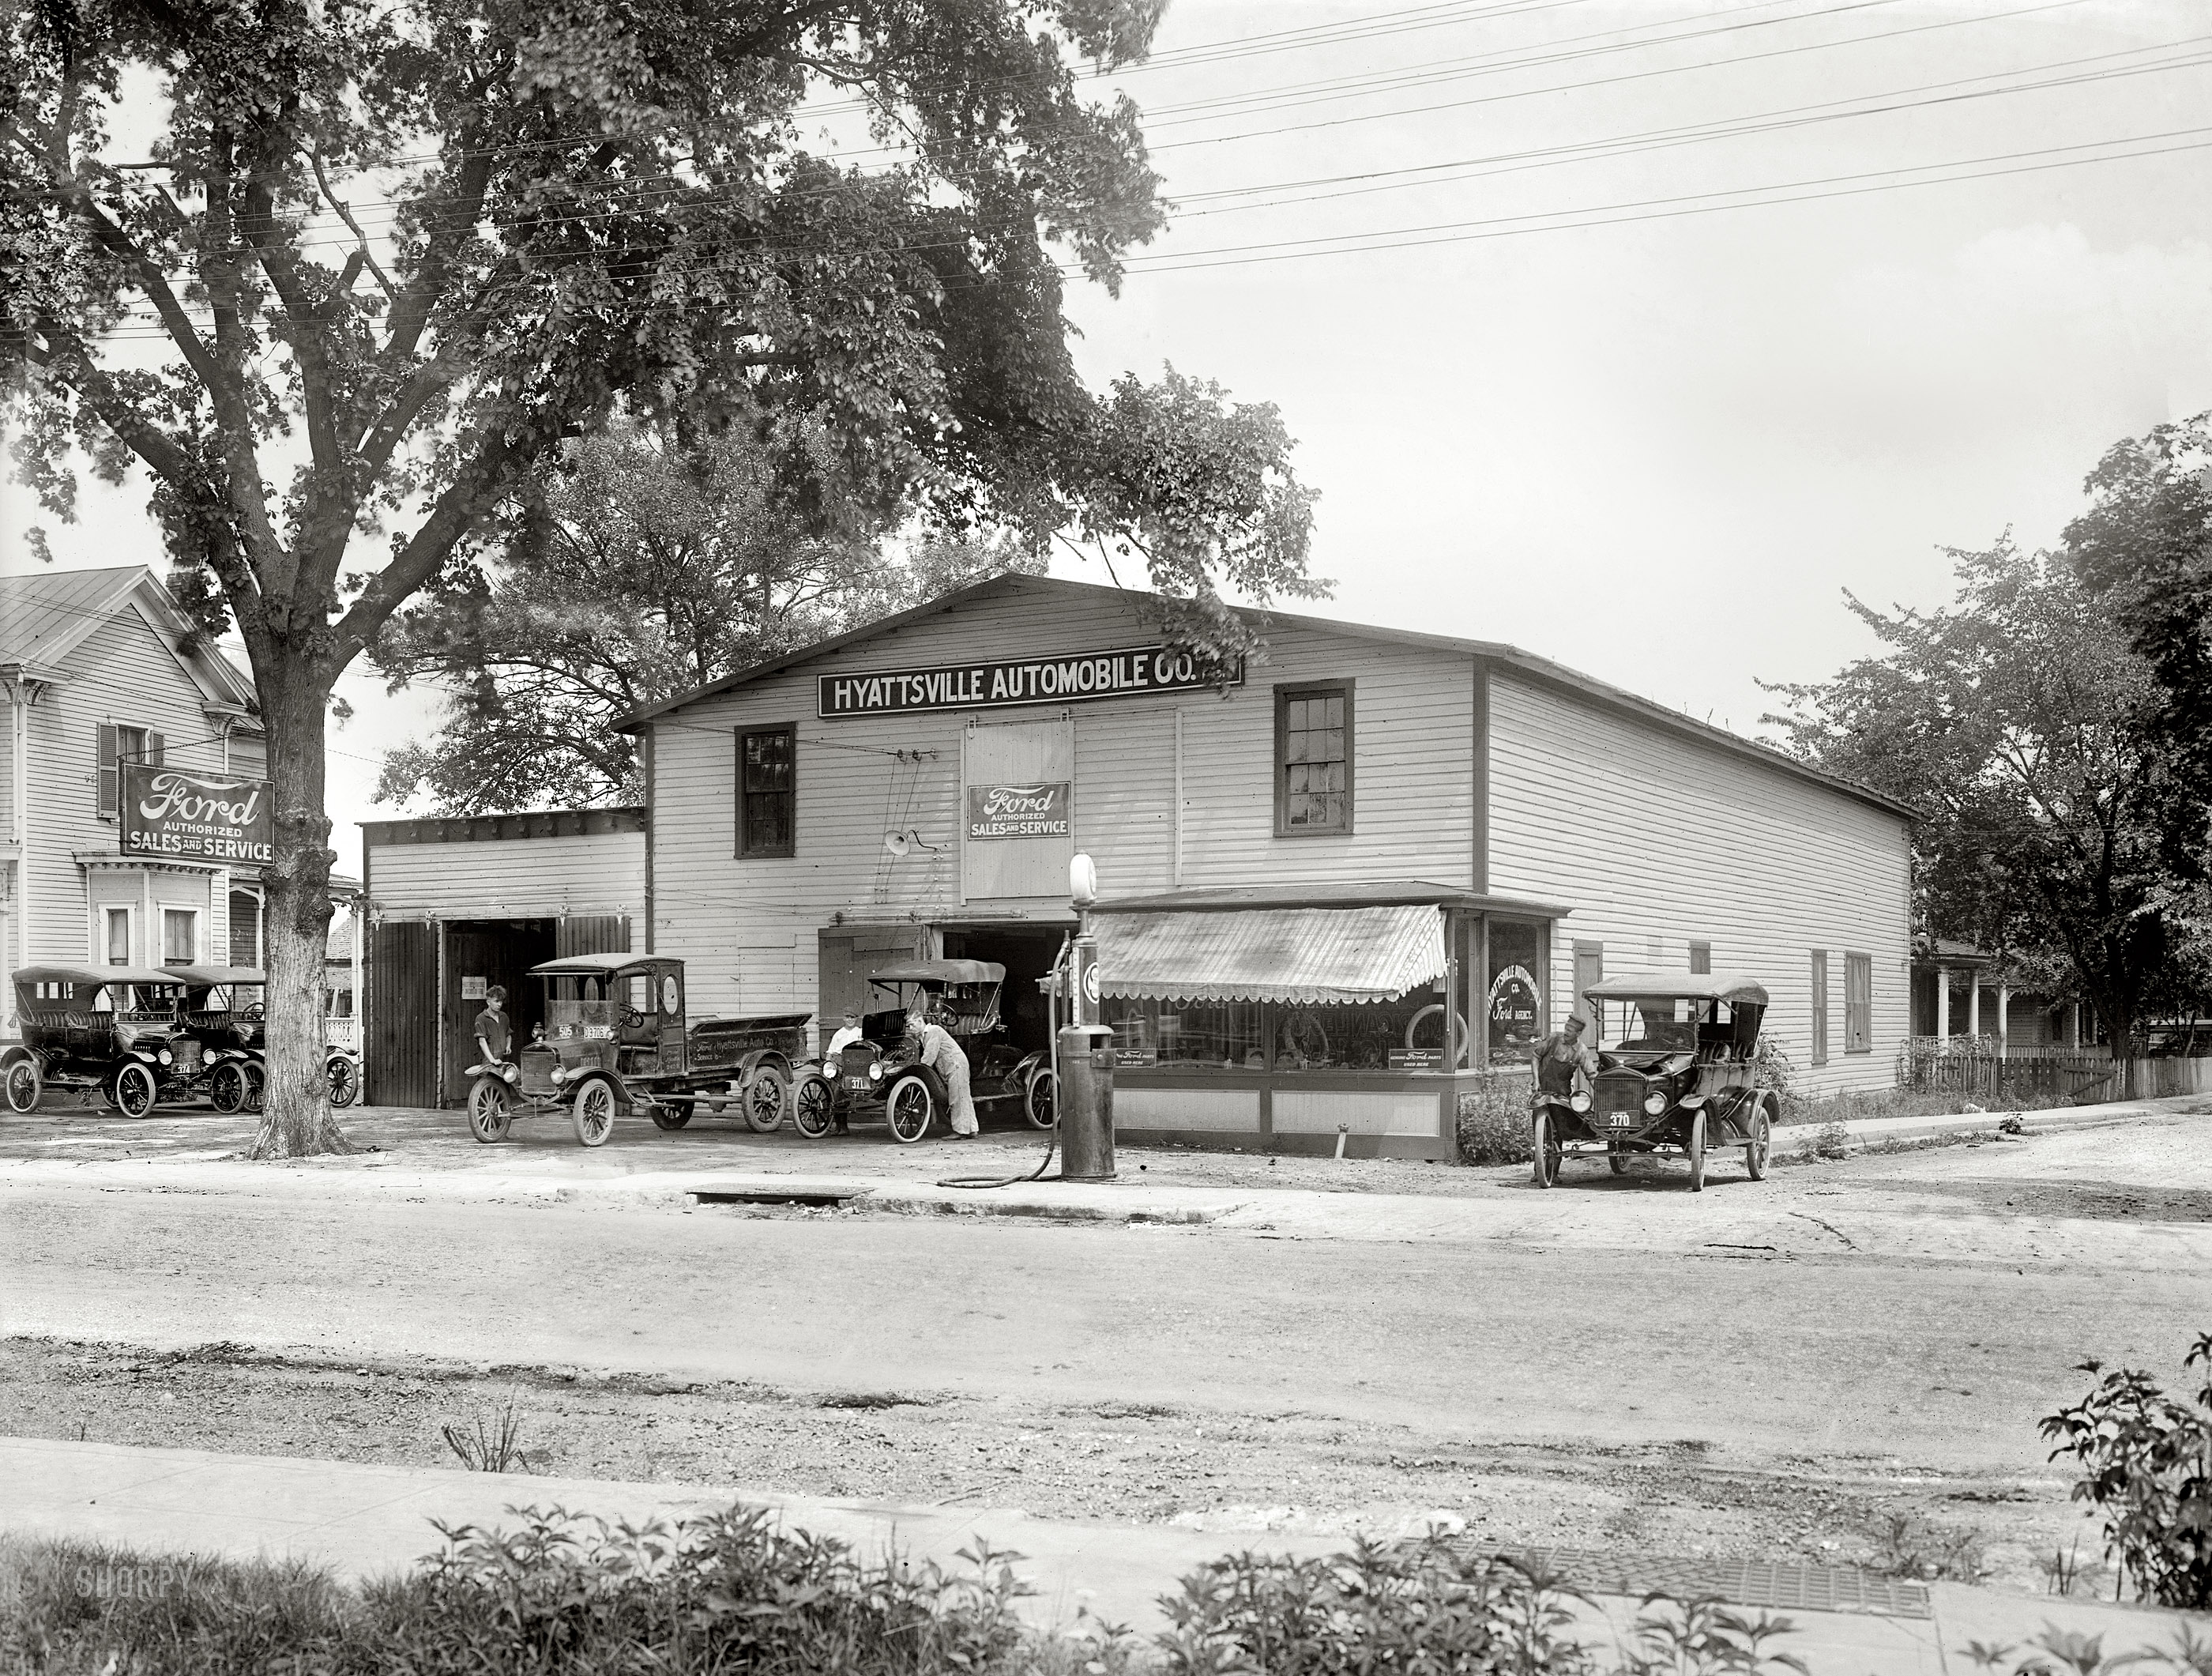 Prince George's County, Maryland, circa 1920. "Hyattsville Automobile Co." National Photo Company Collection glass negative. View full size.